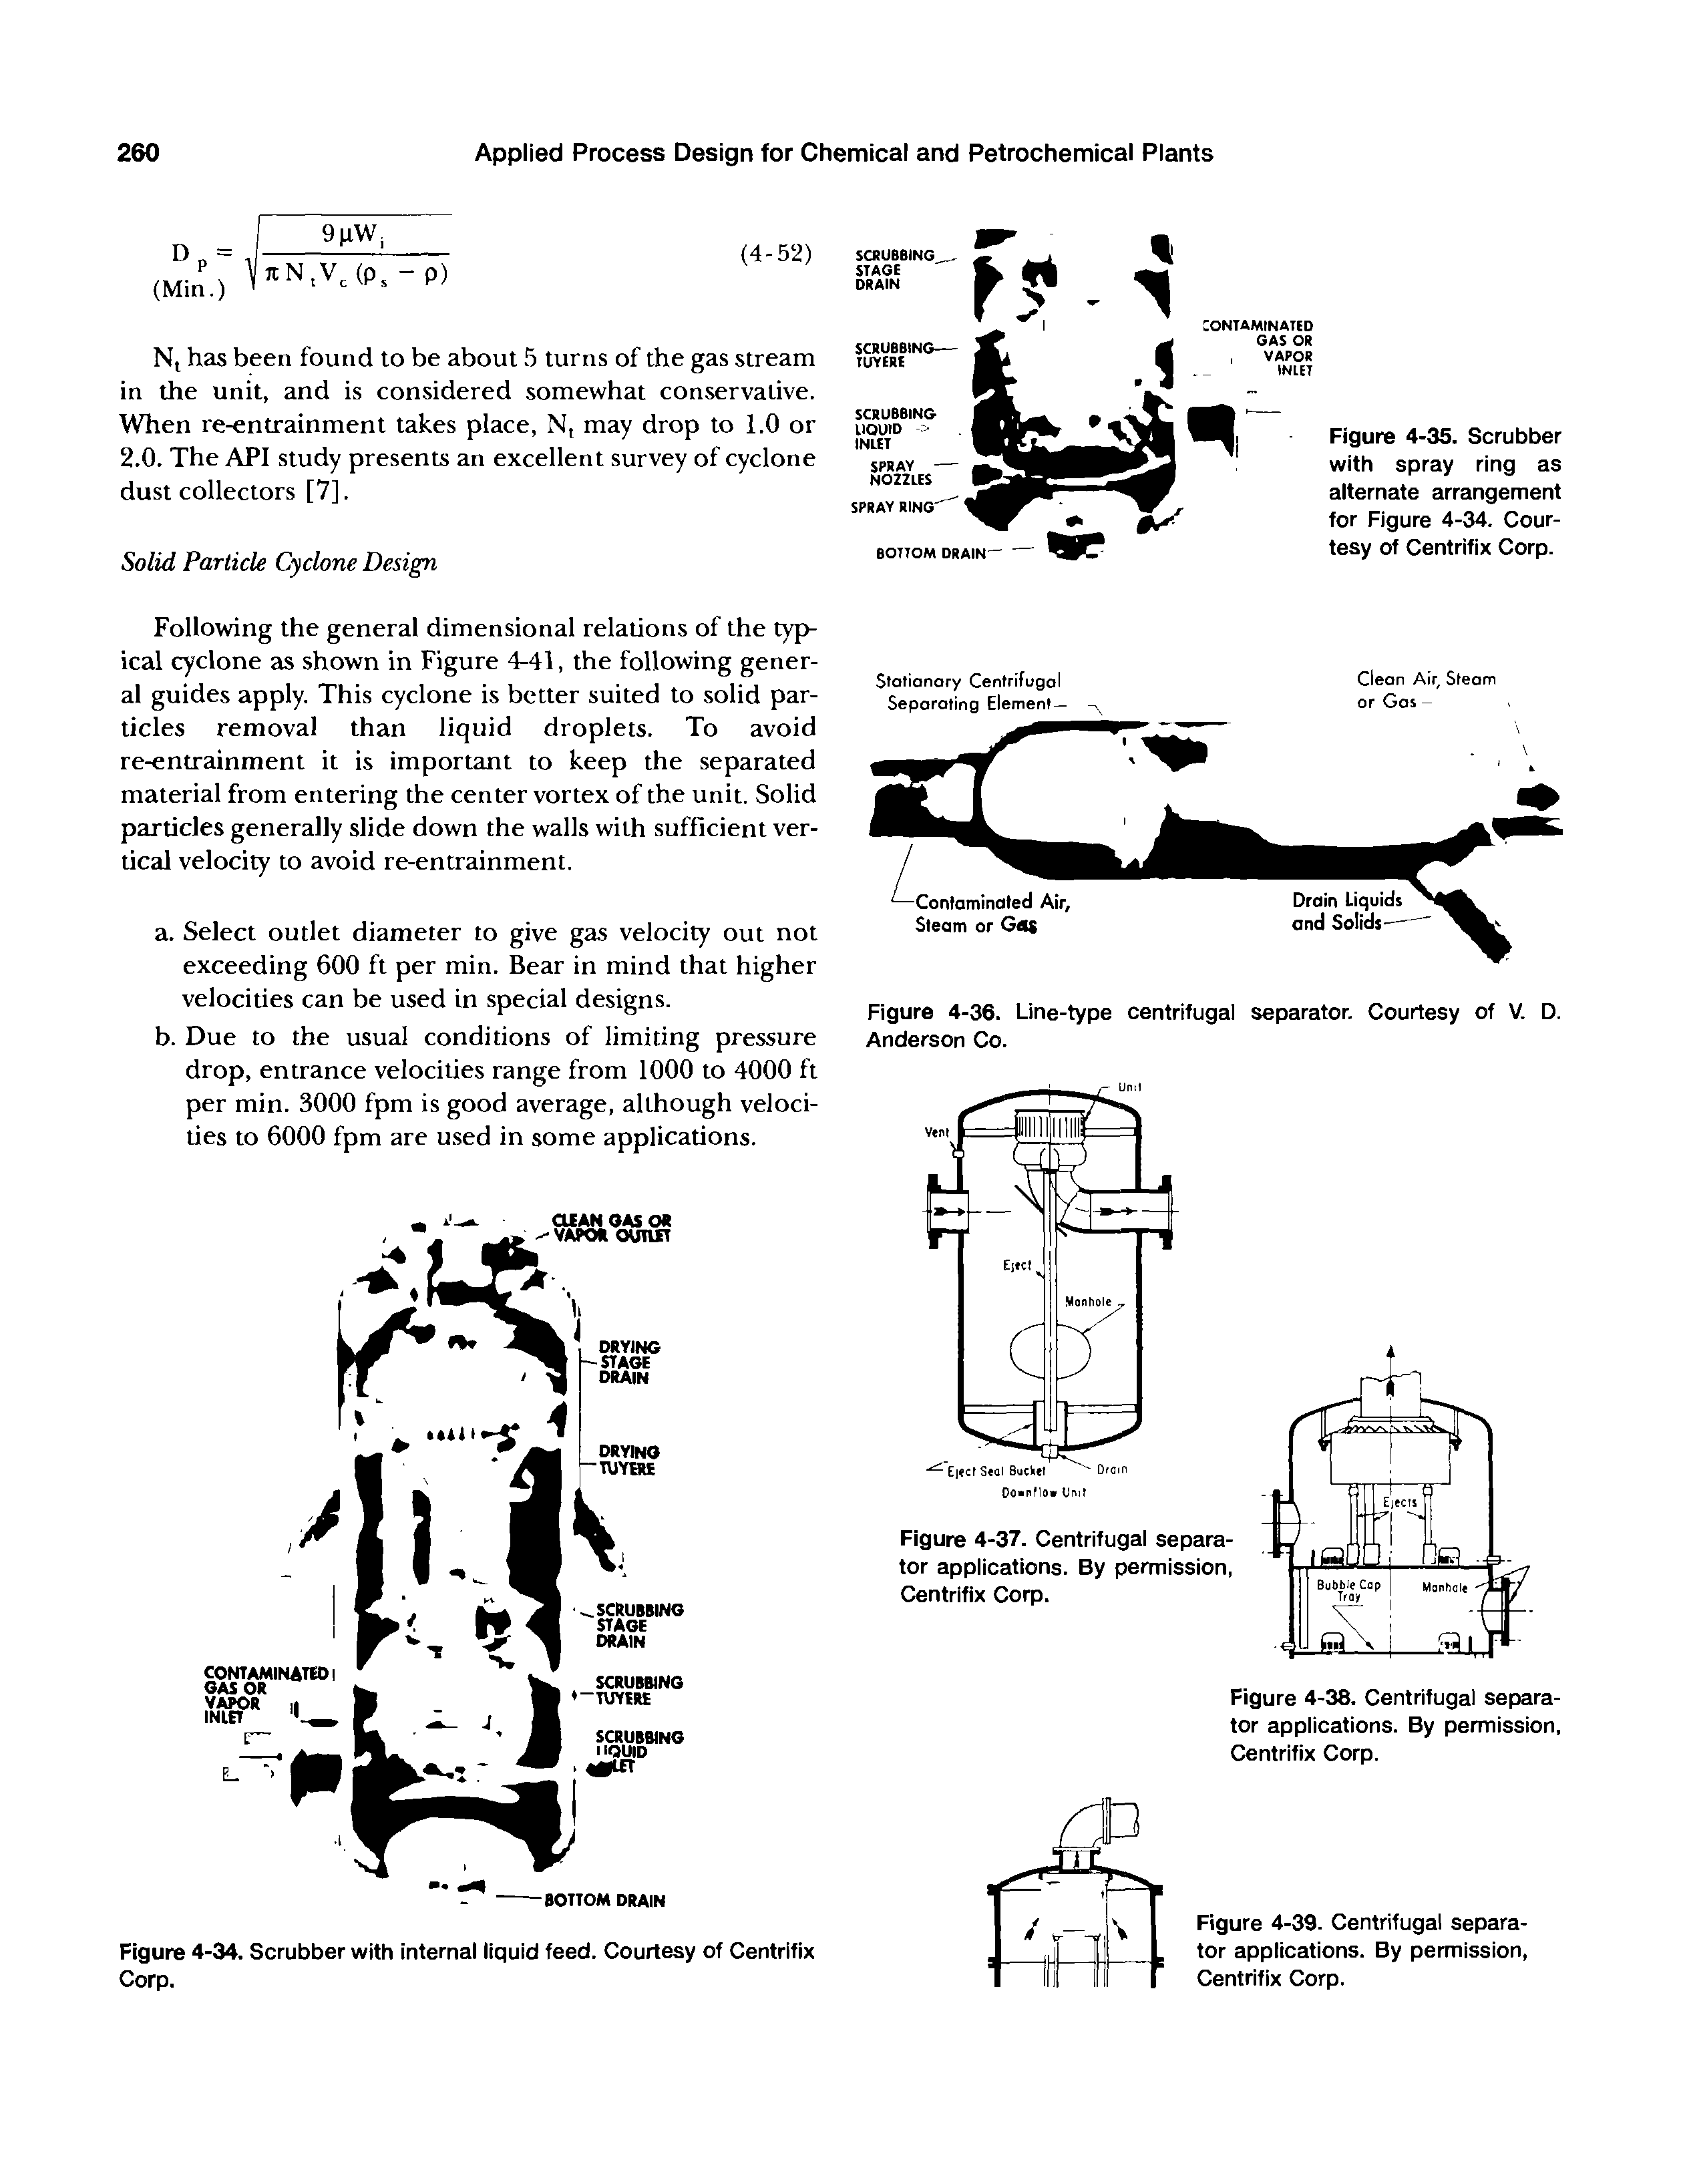 Figure 4-37. Centrifugal separator applications. By permission, Centrifix Corp.